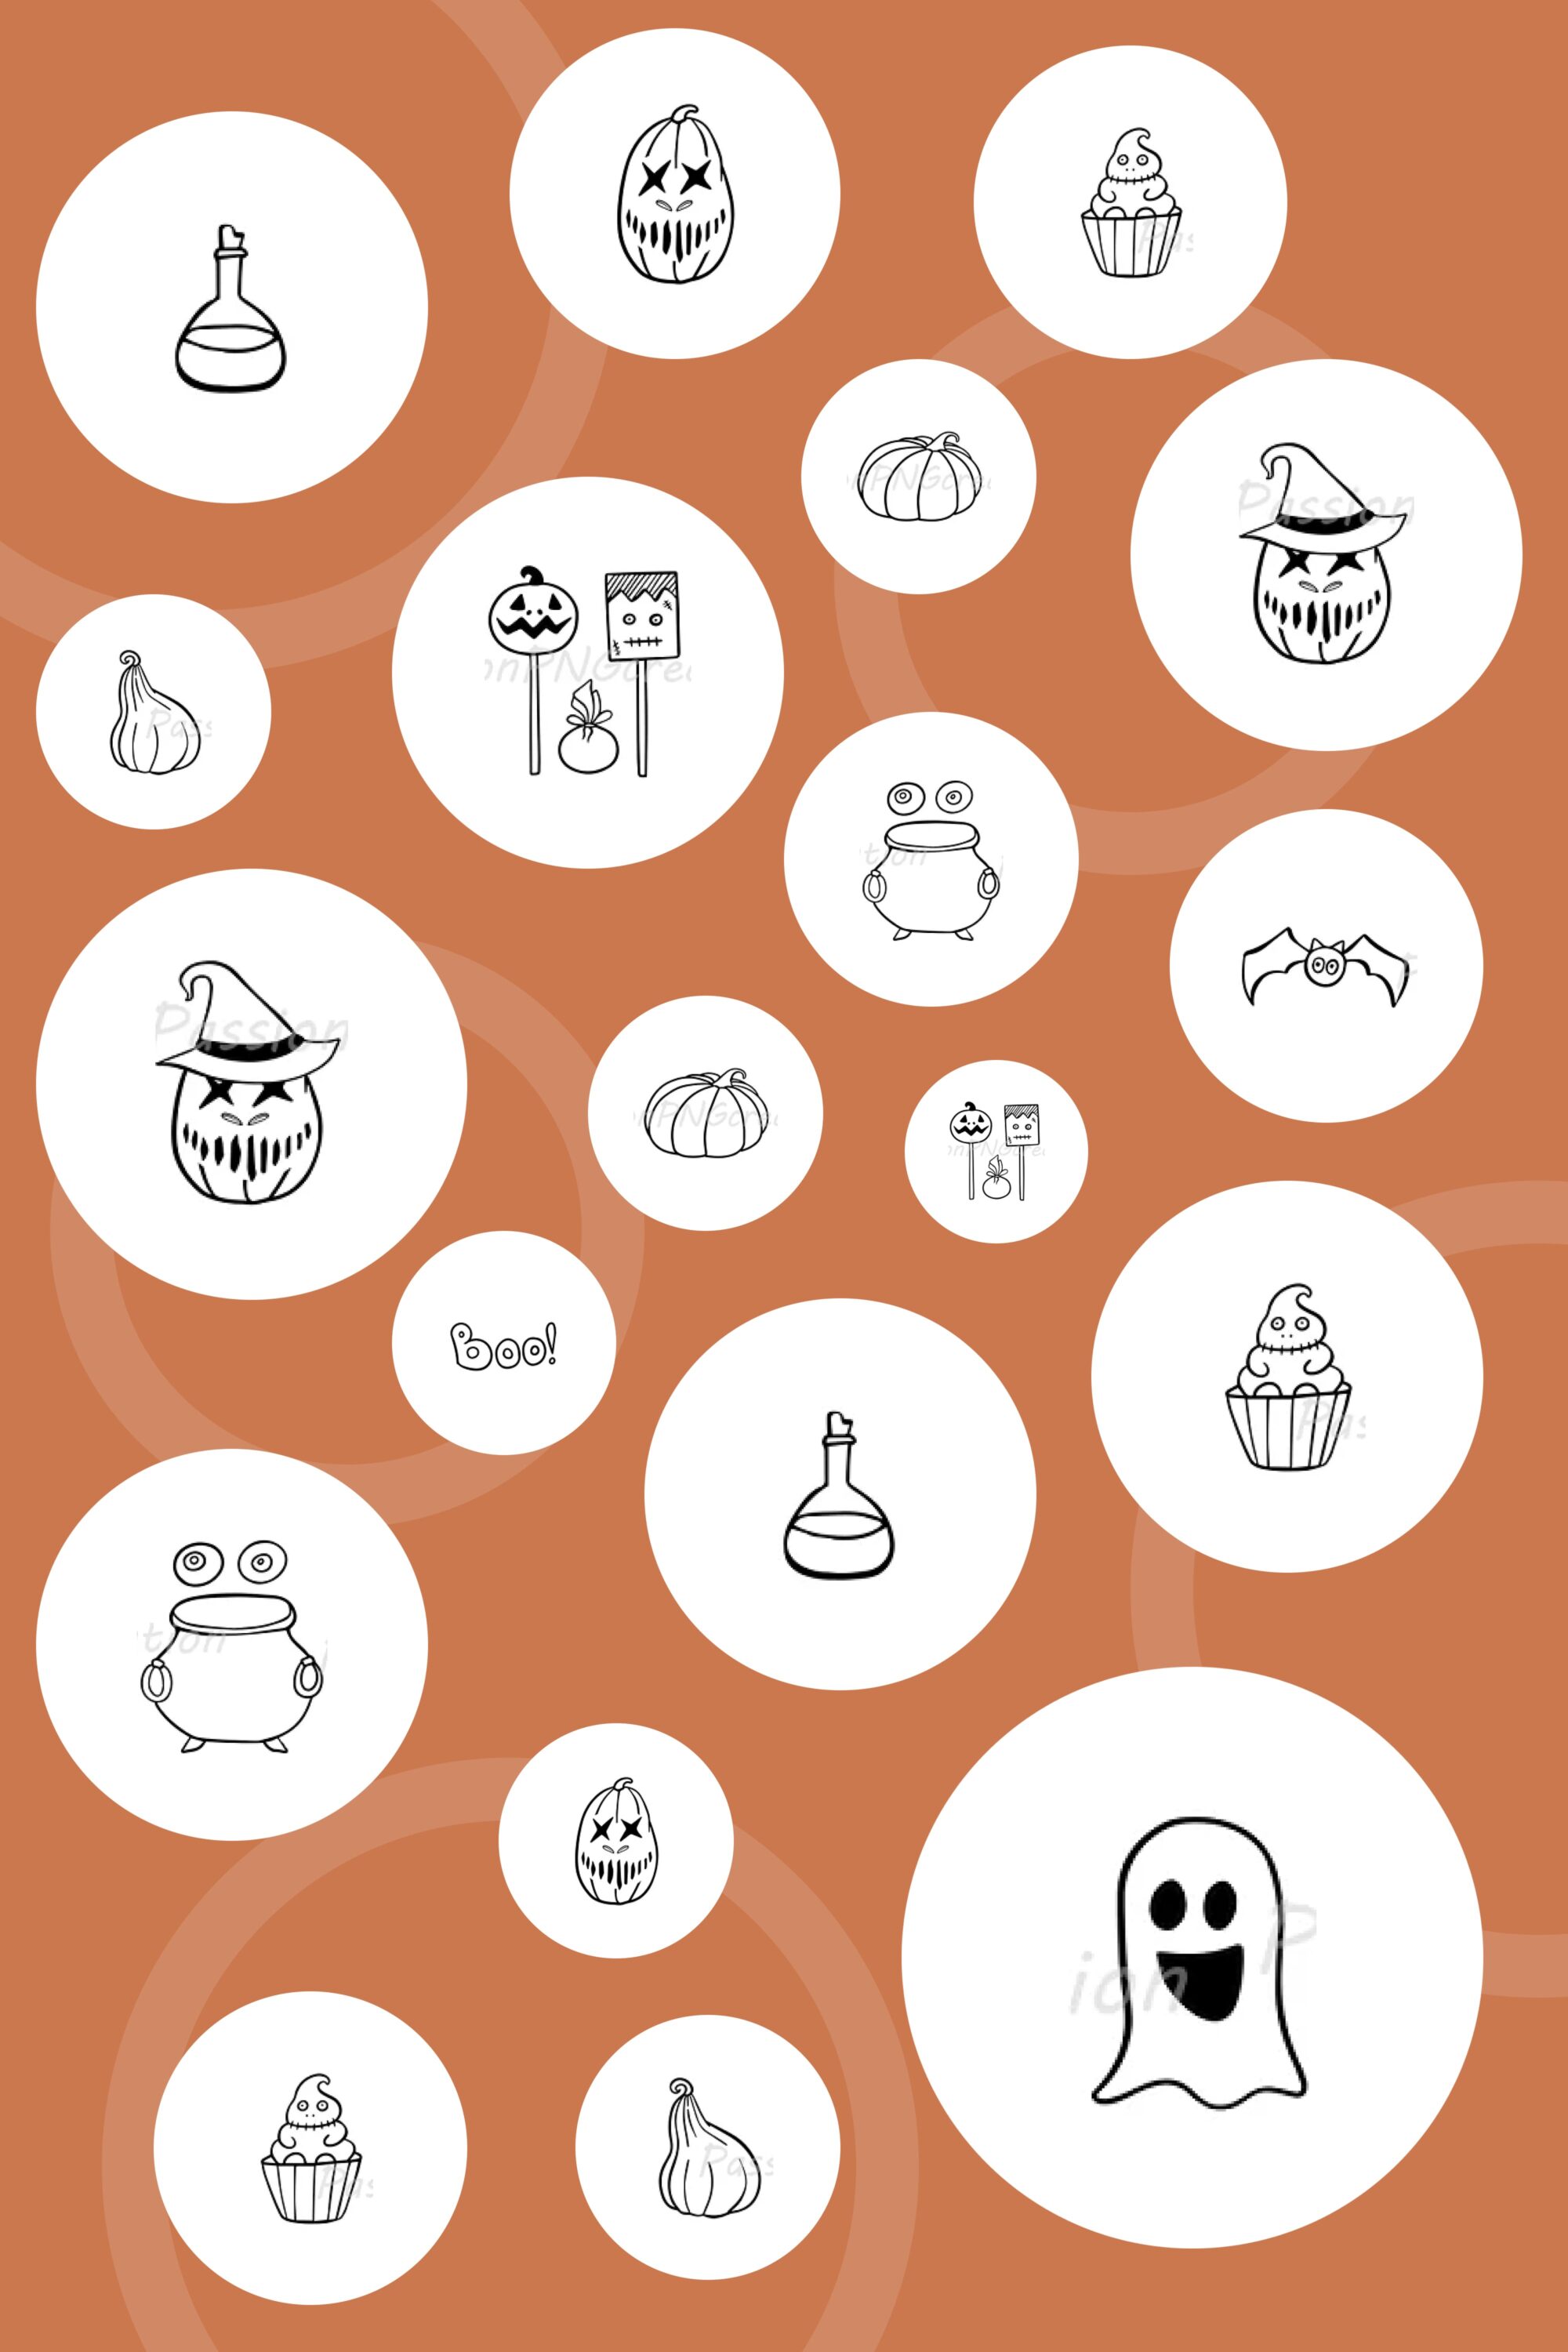 Colorful Halloween illustrations for happy holiday.